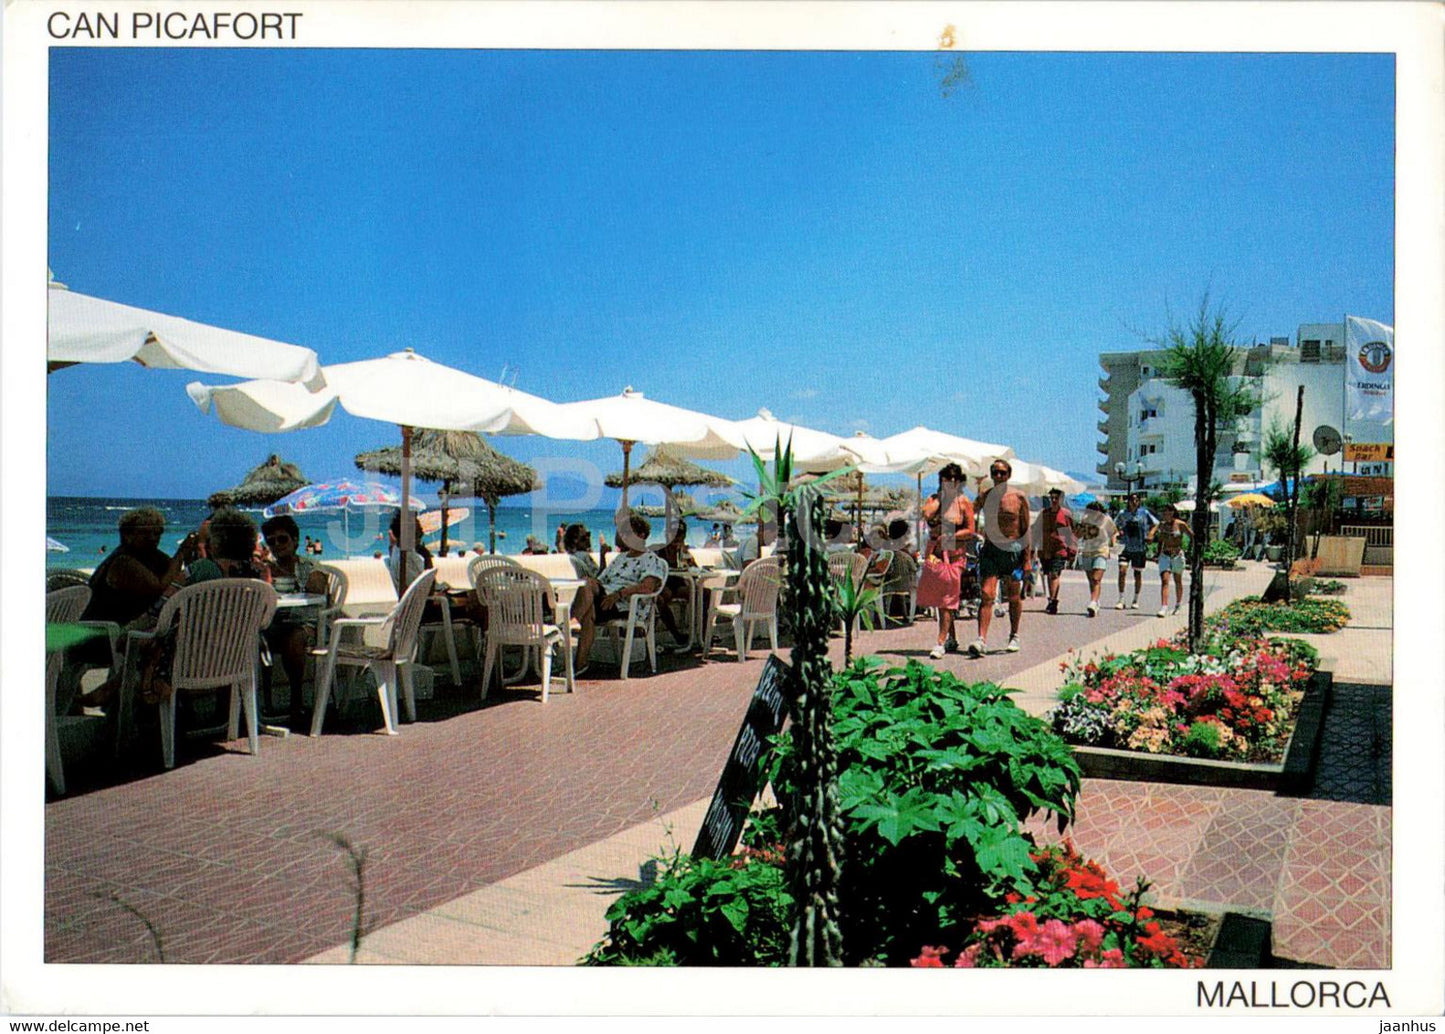 Mallorca - Can Picafort - Spain - used - JH Postcards